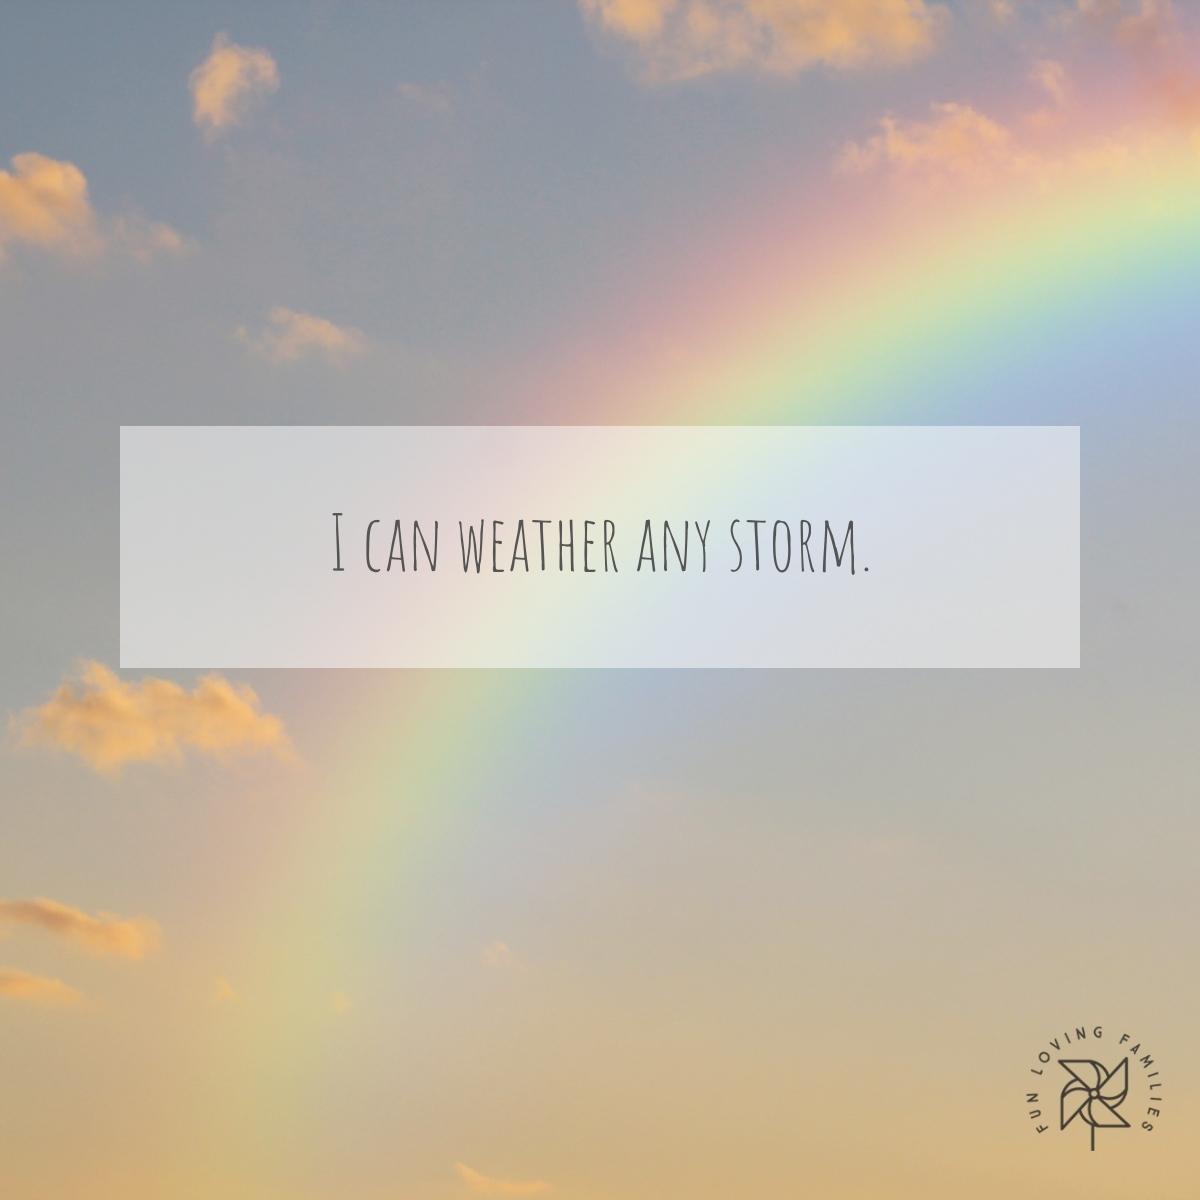 I can weather any storm affirmation